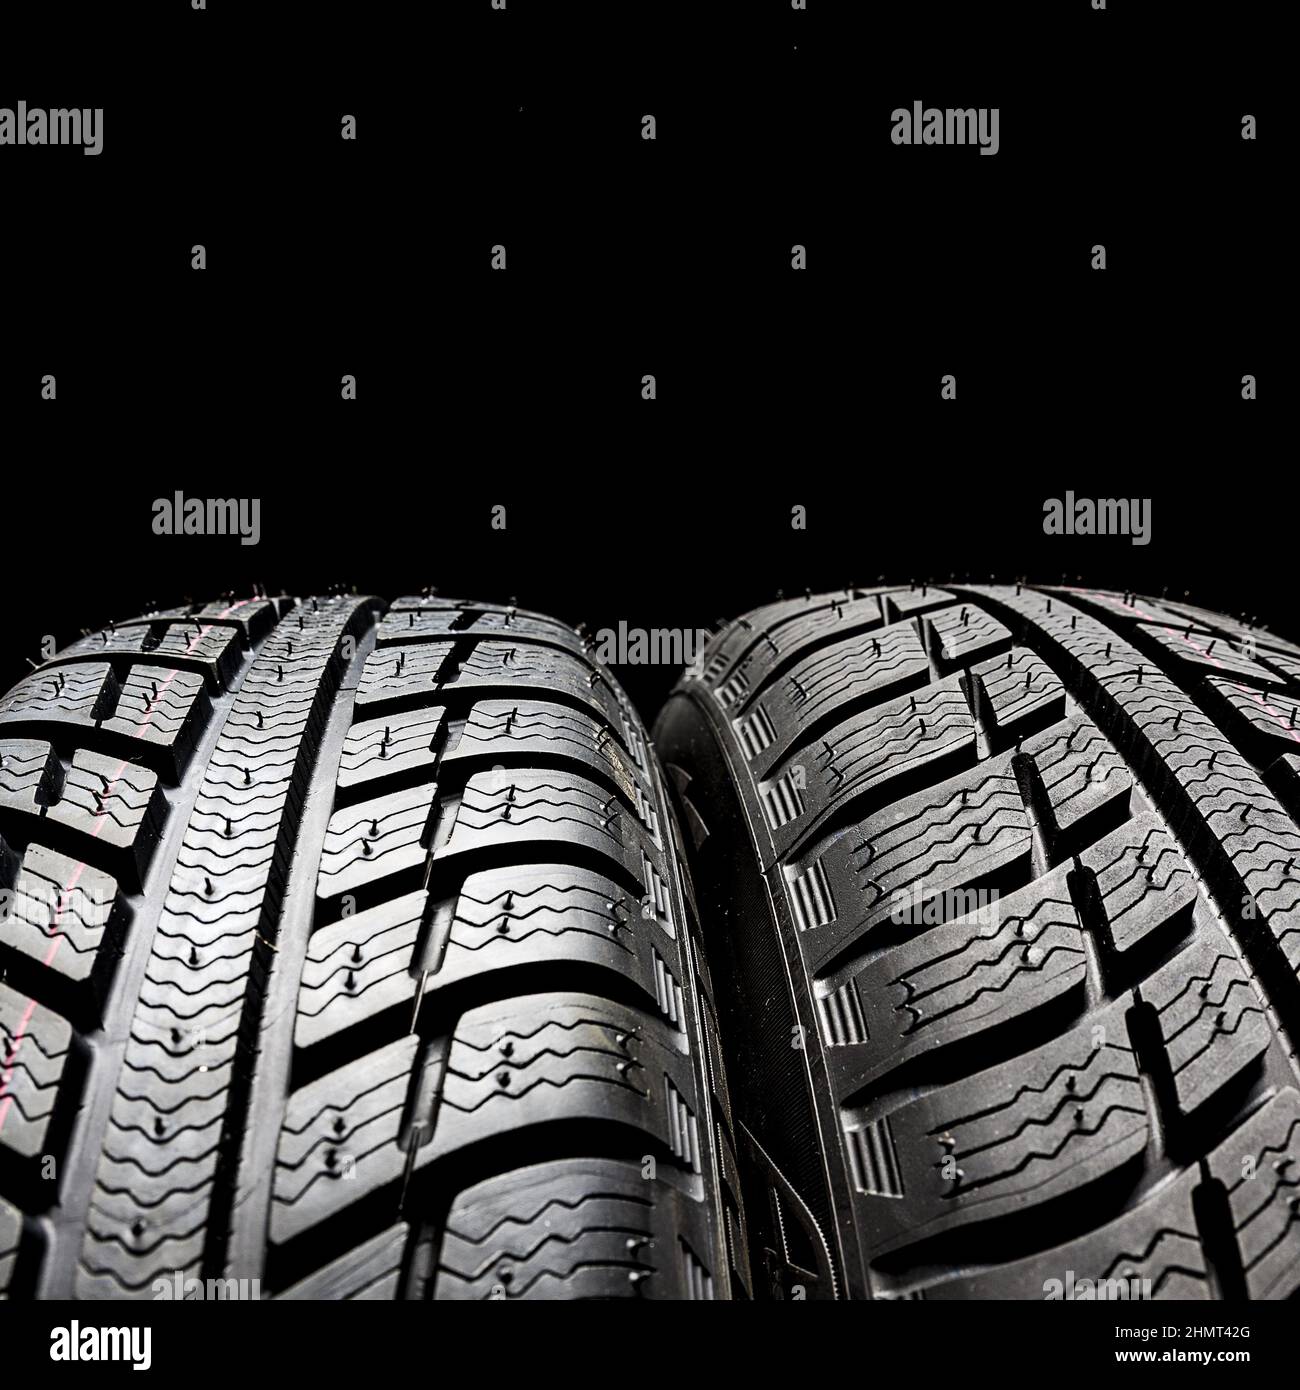 Car tires close-up Winter wheels profile structure on black background Stock Photo